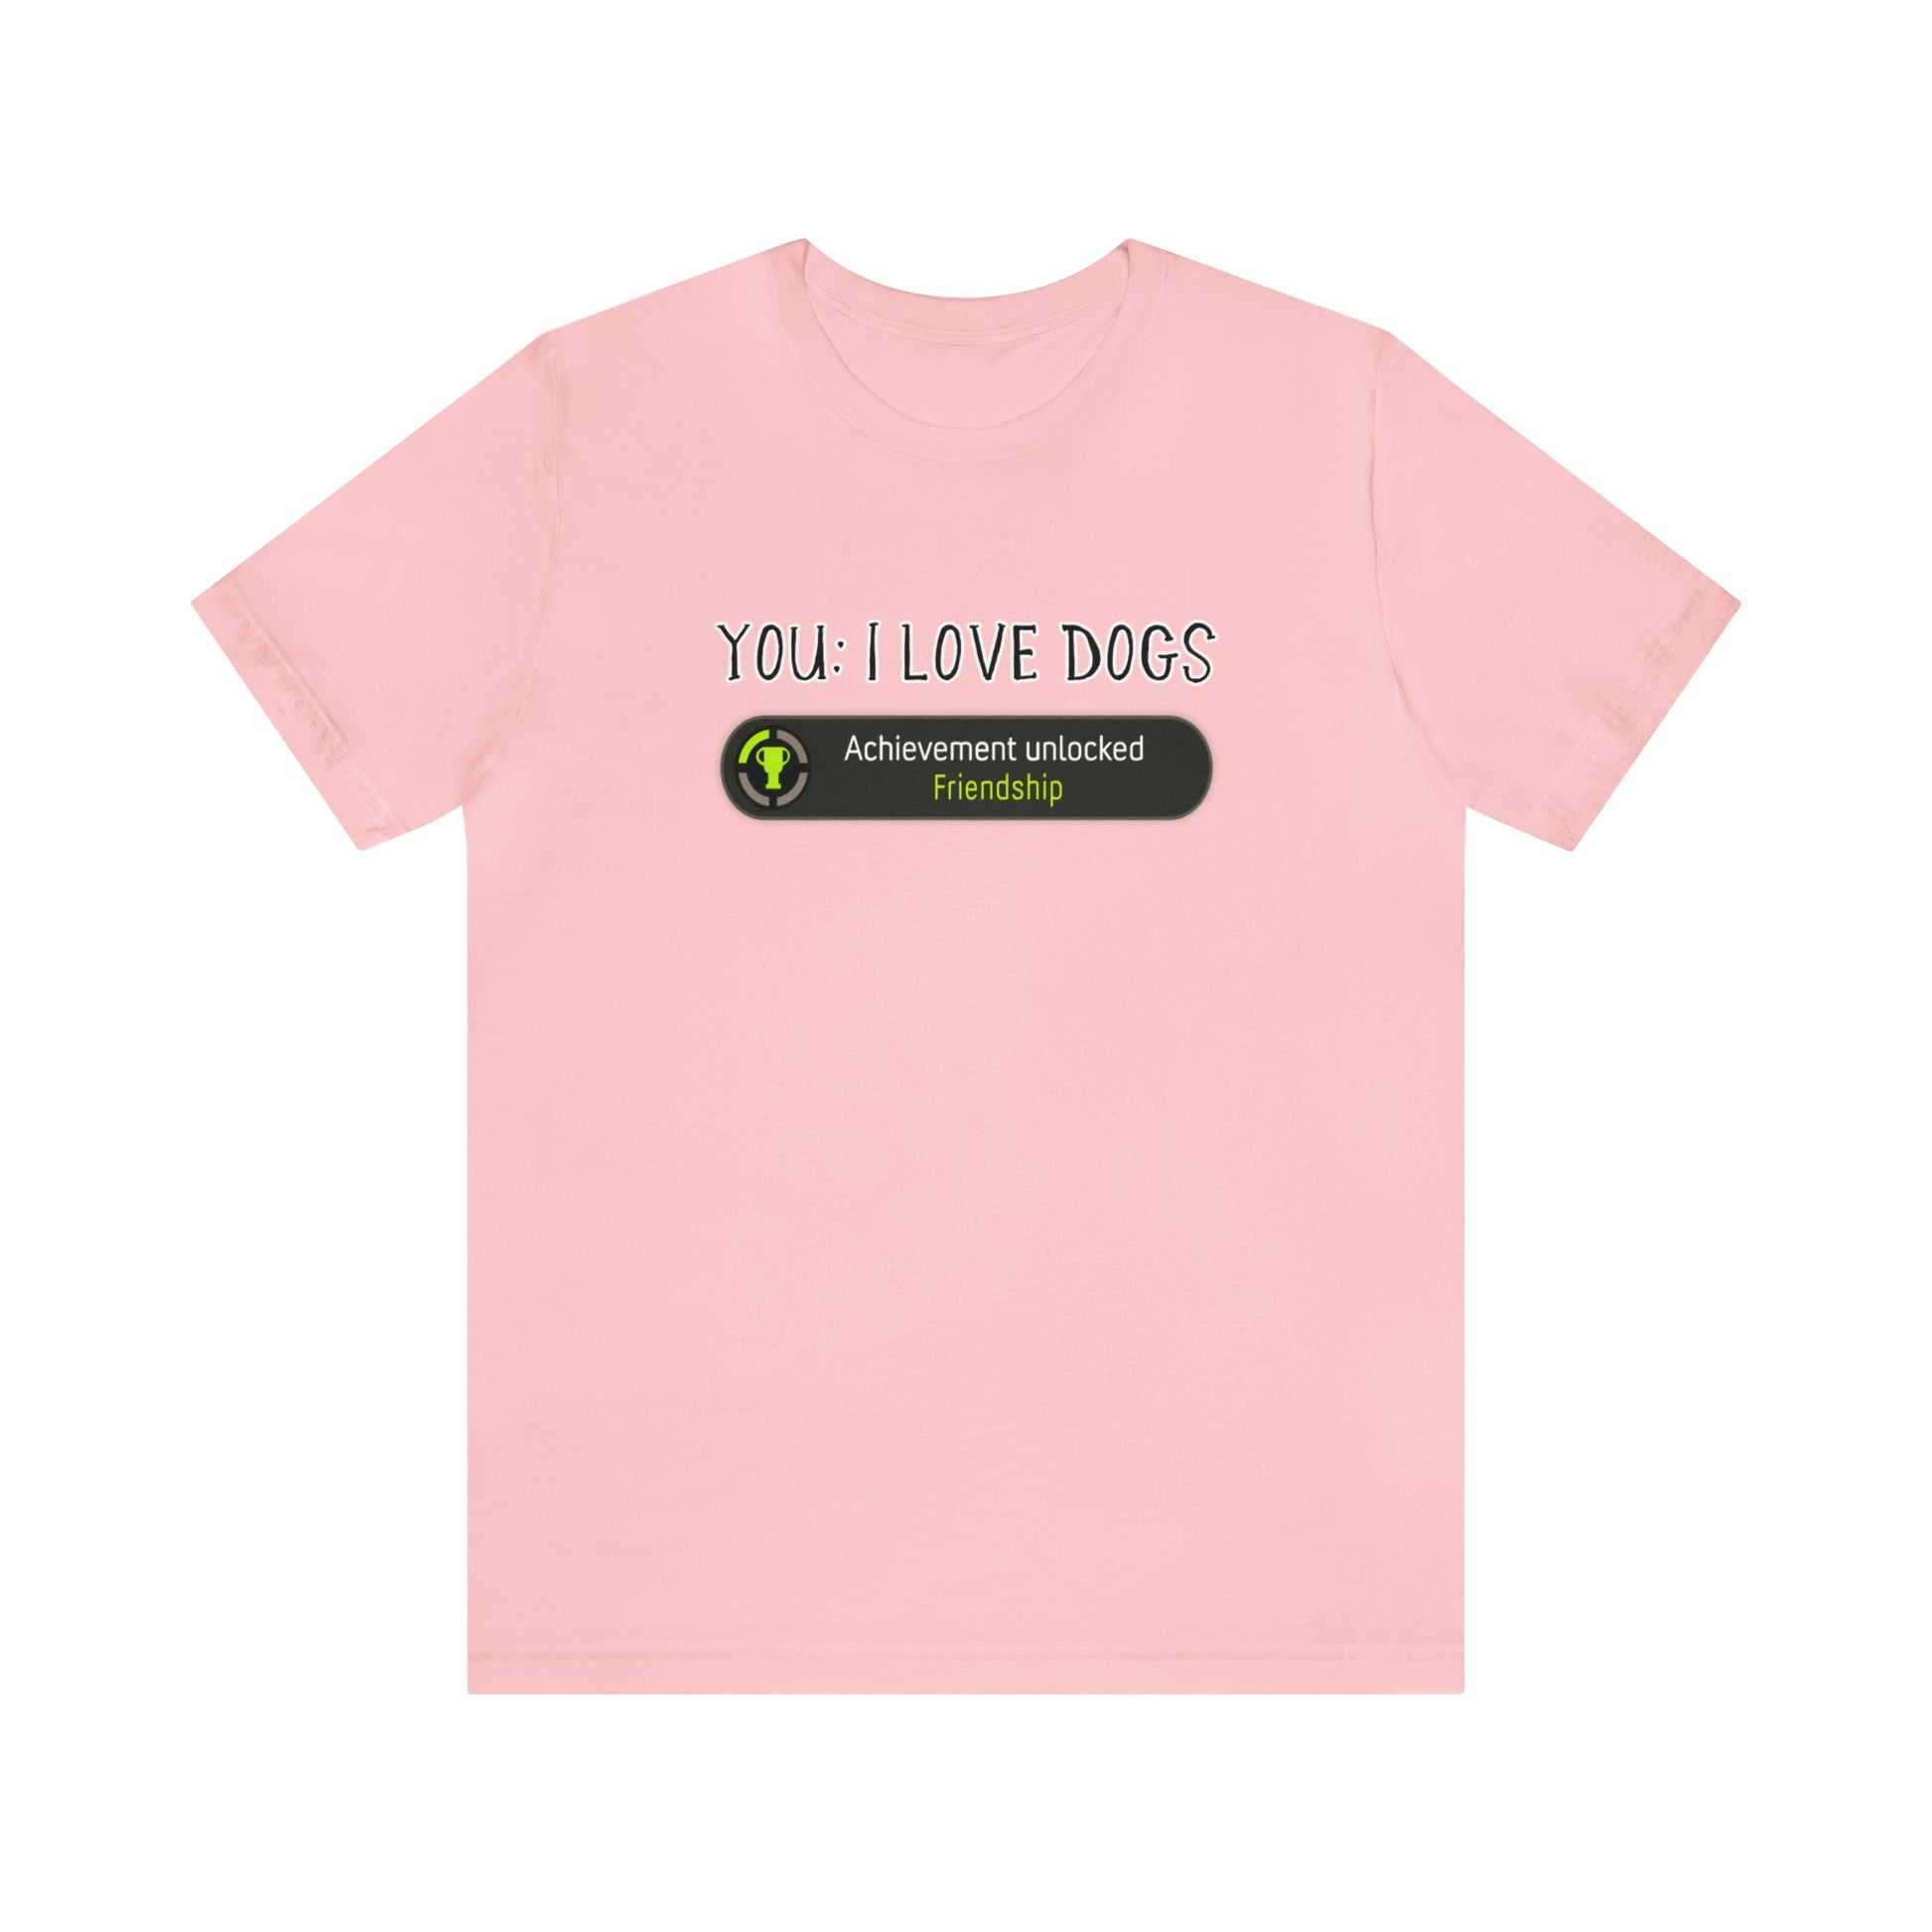 you love dogs funny t shirt pink